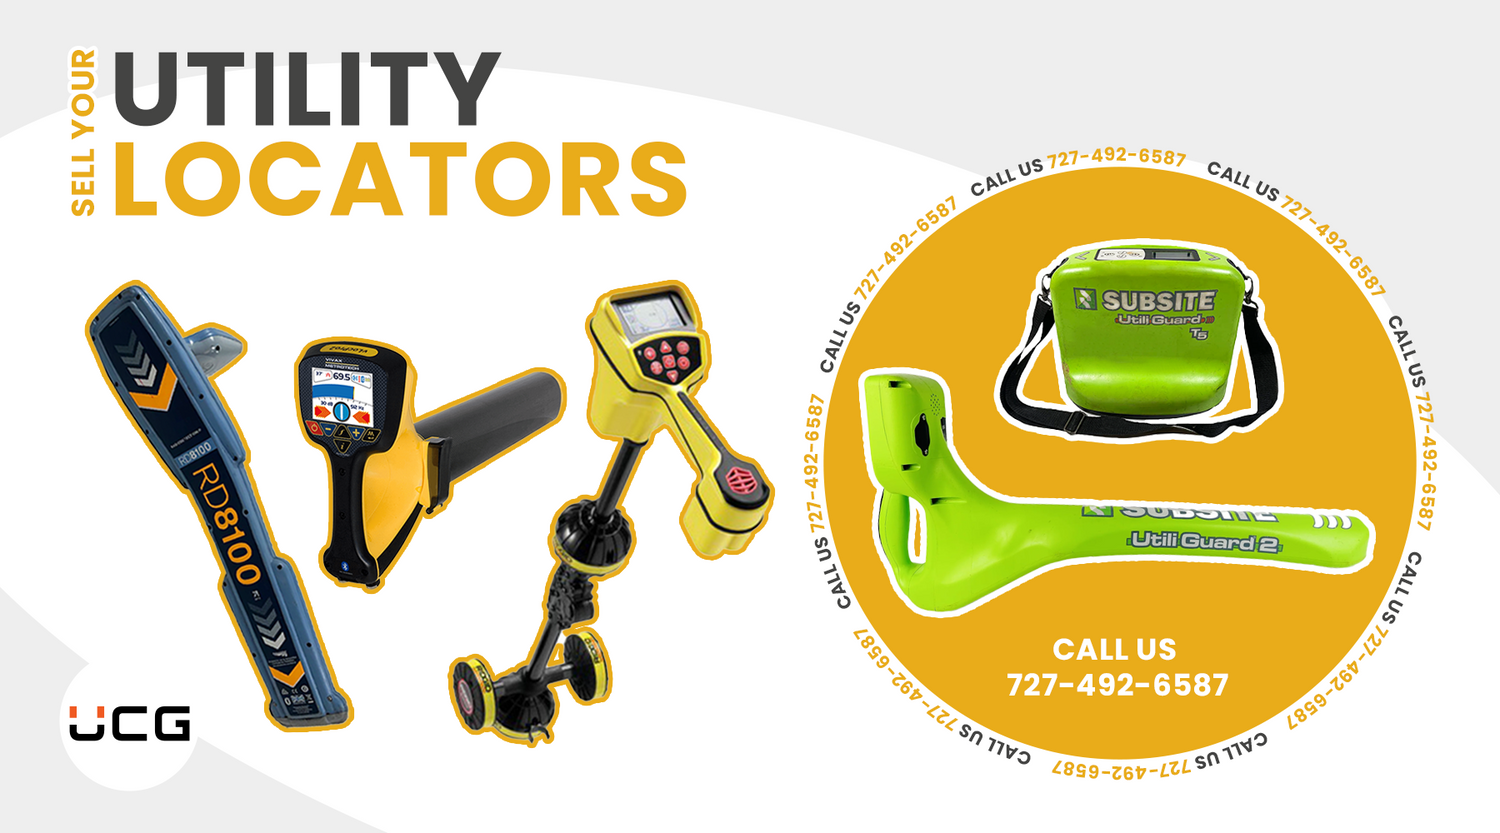 We Buy Used Utility Locators - Fair Cash Offers for Your Equipment